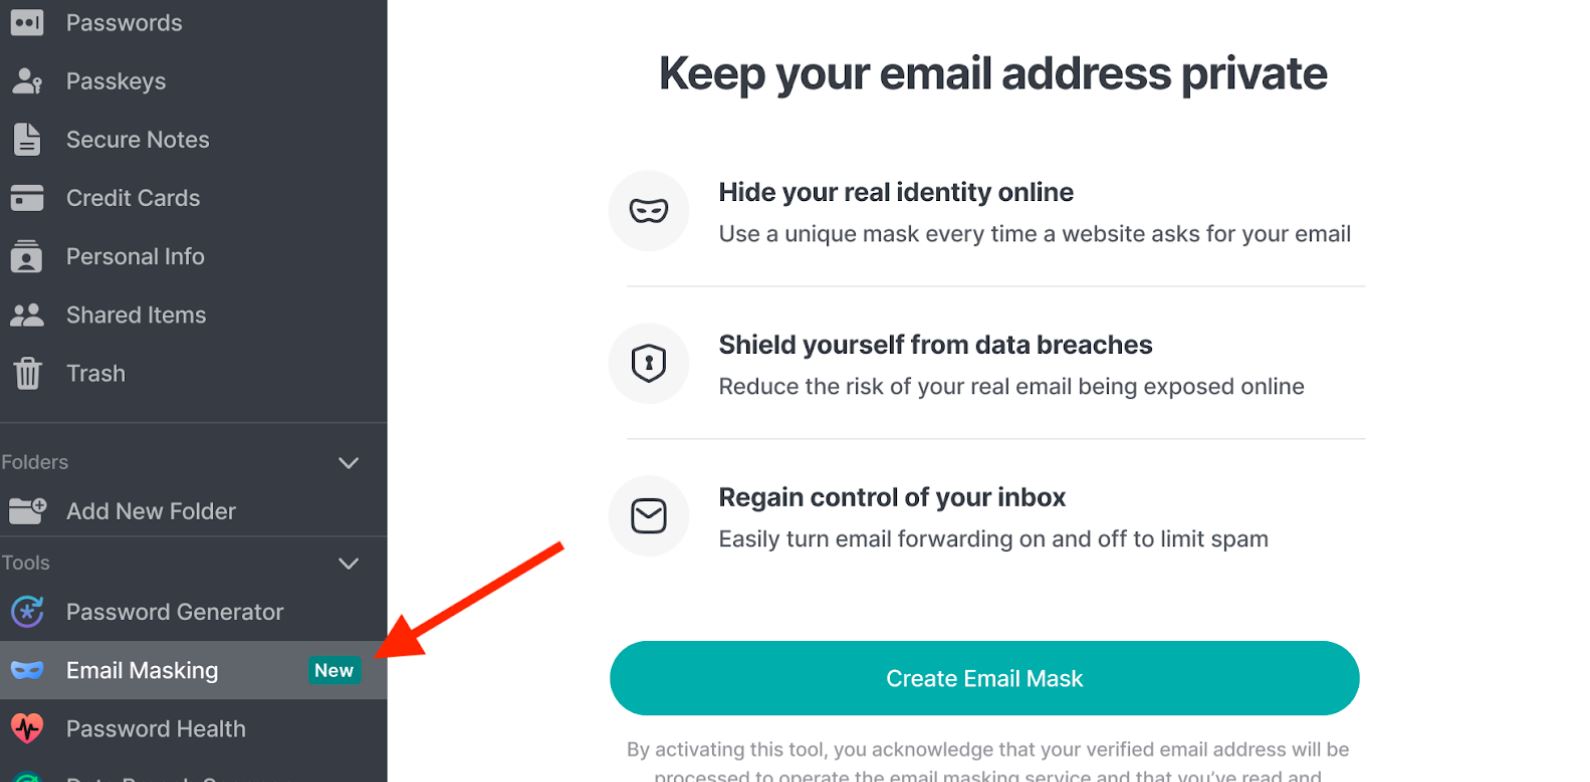 NordPass Introduces Email Masking Feature to Combat Spam